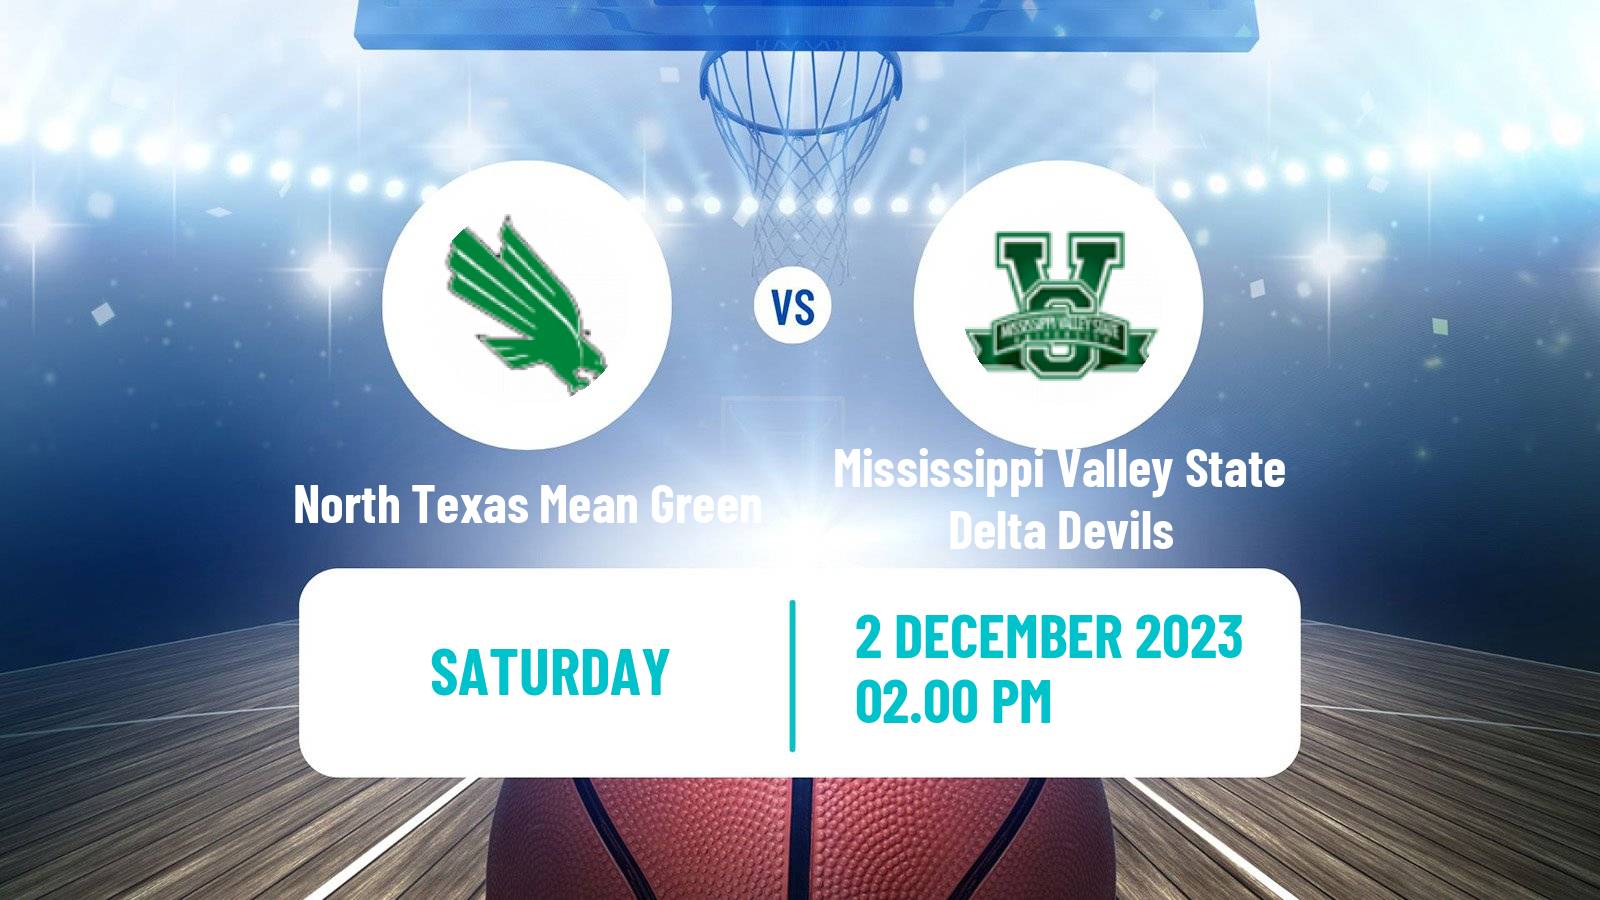 Basketball NCAA College Basketball North Texas Mean Green - Mississippi Valley State Delta Devils